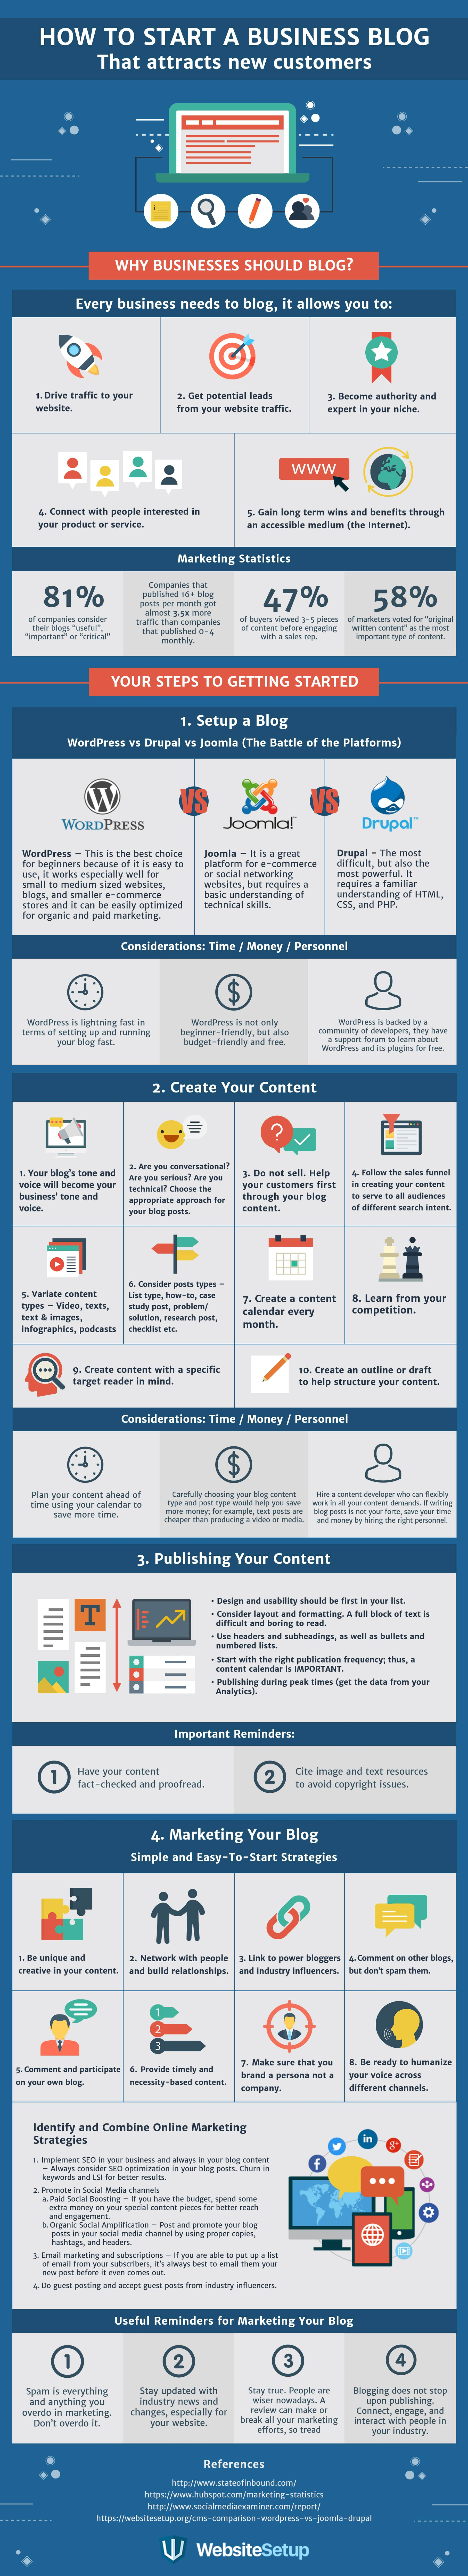 Do You Need a Blog for your Business? [Infographic]